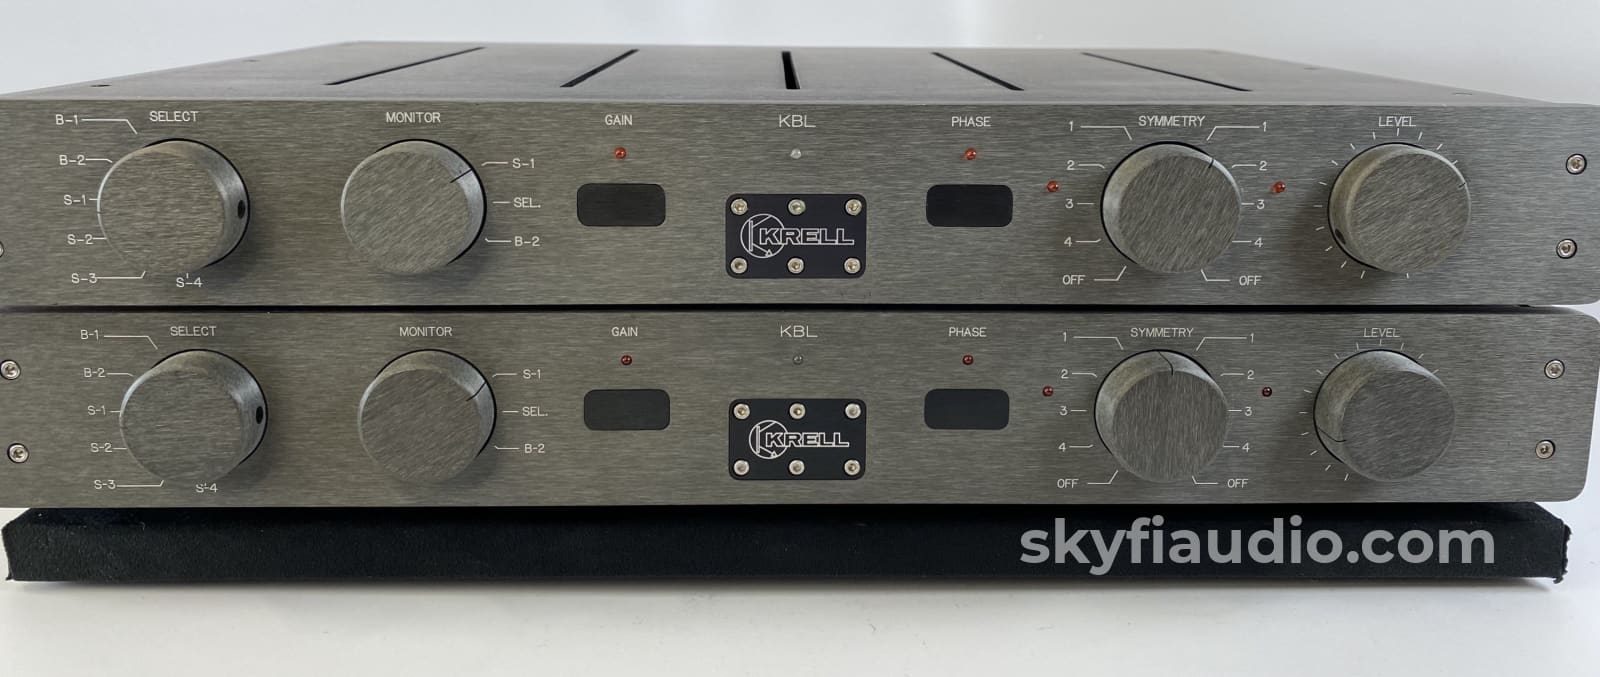 Krell Kbl Dual Mono Preamp Stack With Dual Power Supplies Preamplifier